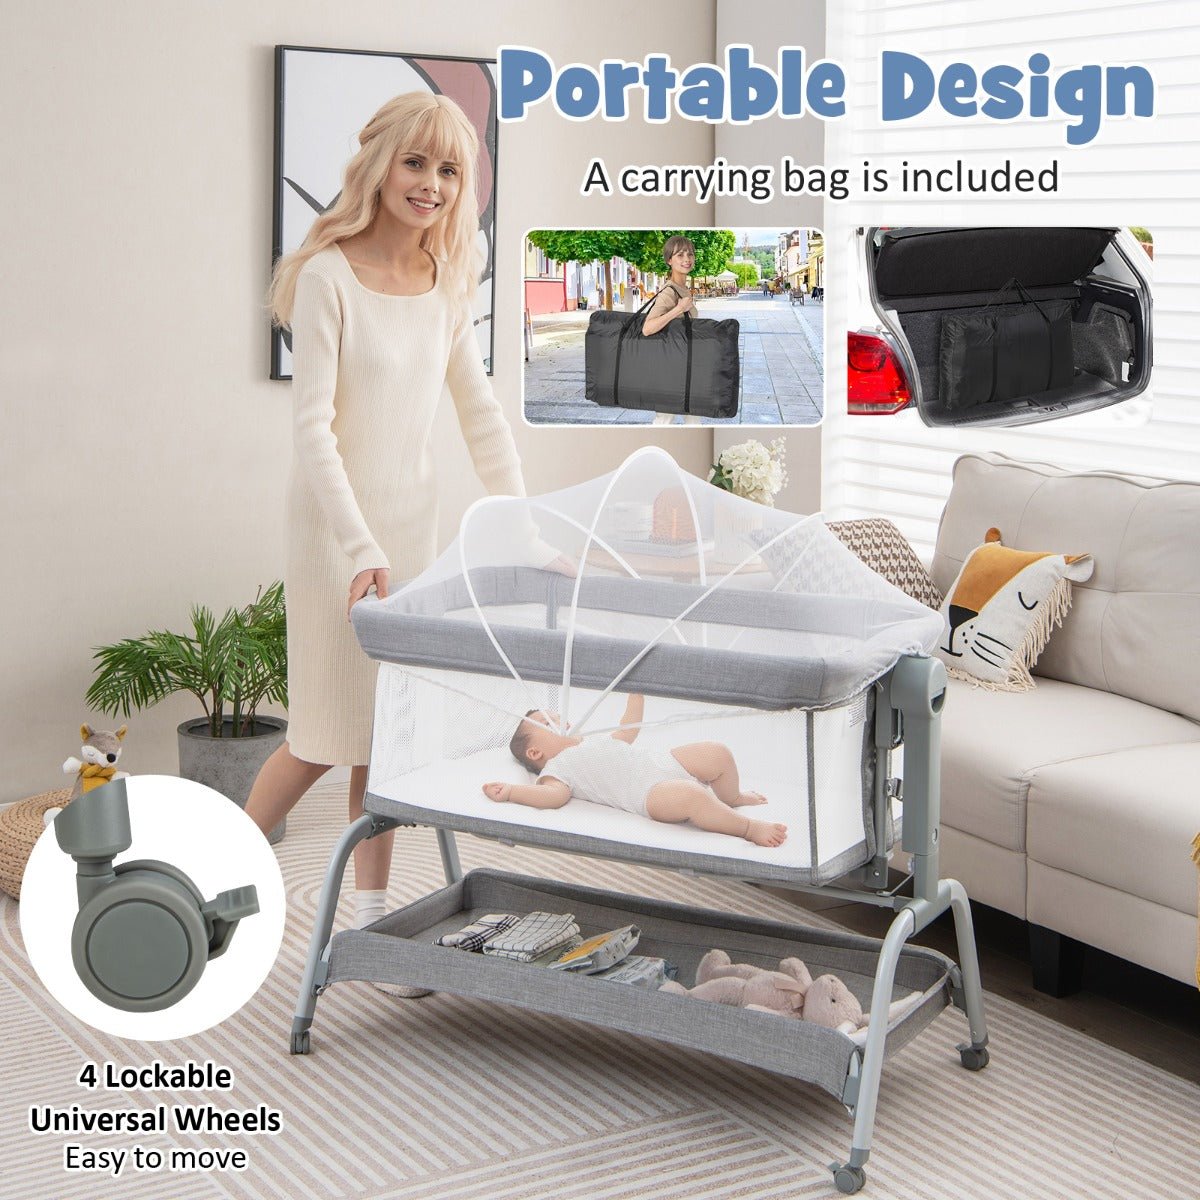 Enhance Your Baby's Sleep with the Grey 3-in-1 Travel Cot - Buy Now!